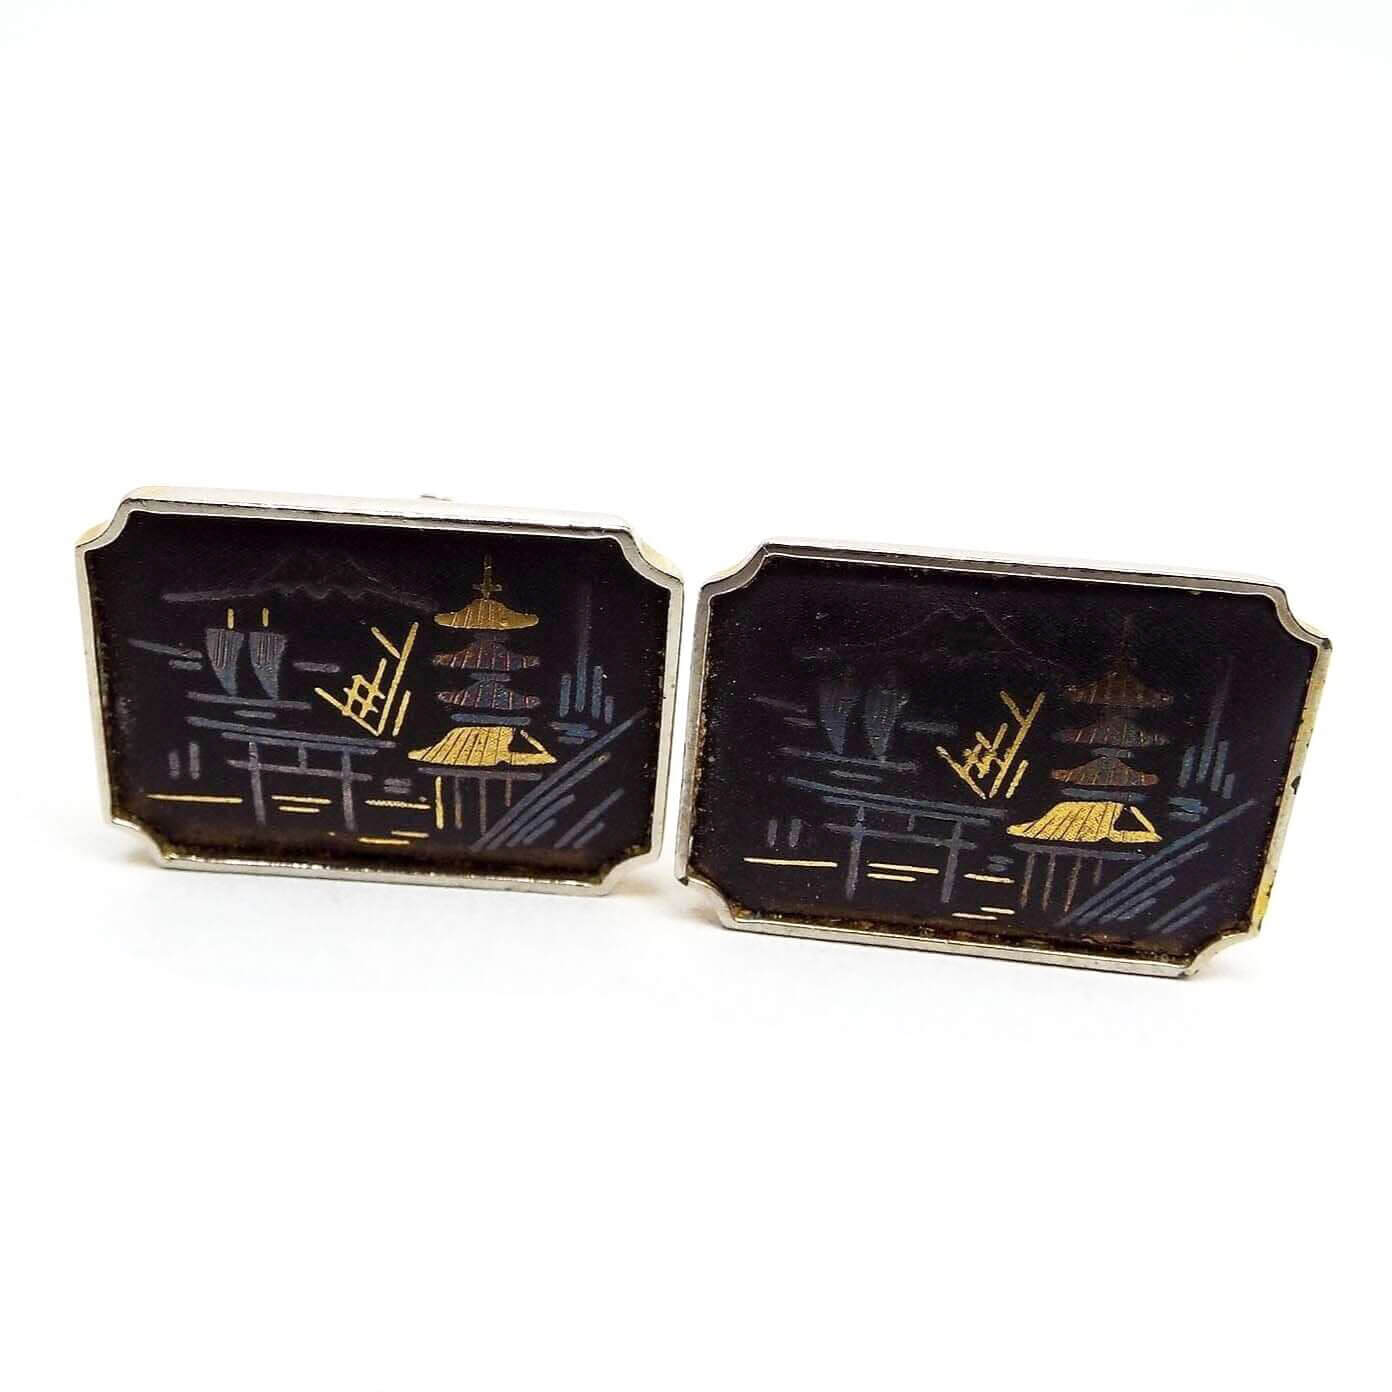 Front view of the Amita Damascene cufflinks. Front are black painted with etched design of a Japanese home on the water with a boat in the background. The engraved area shows metal beneath in gold and silver color making up the sea side design. They are rectangular in shape with curved indented corners. 